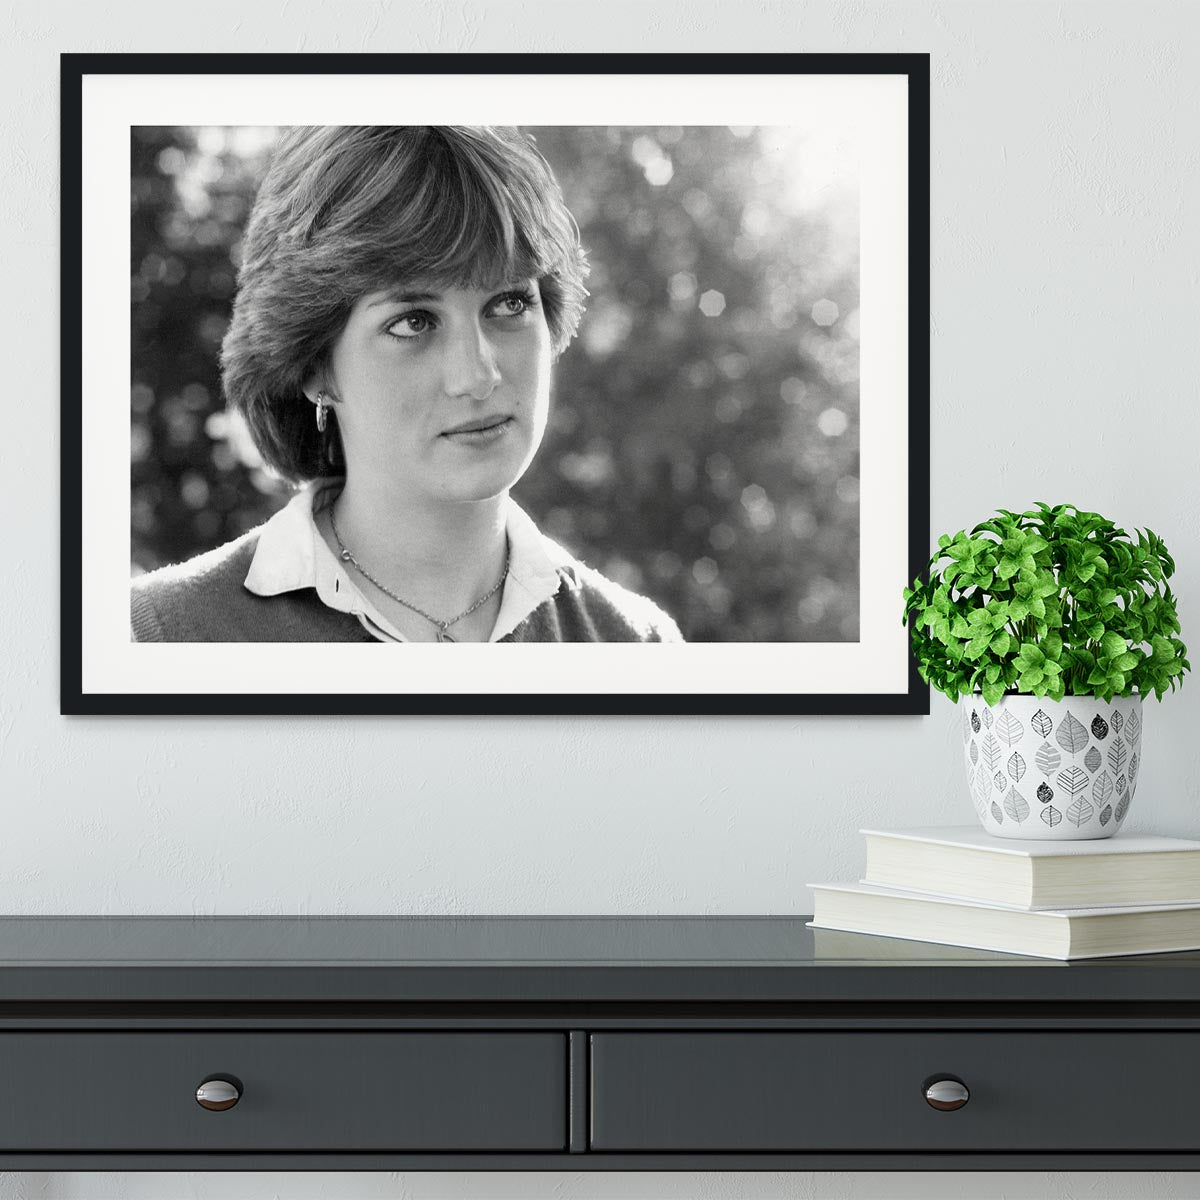 Princess Diana meeting the press for the first time Framed Print - Canvas Art Rocks - 1